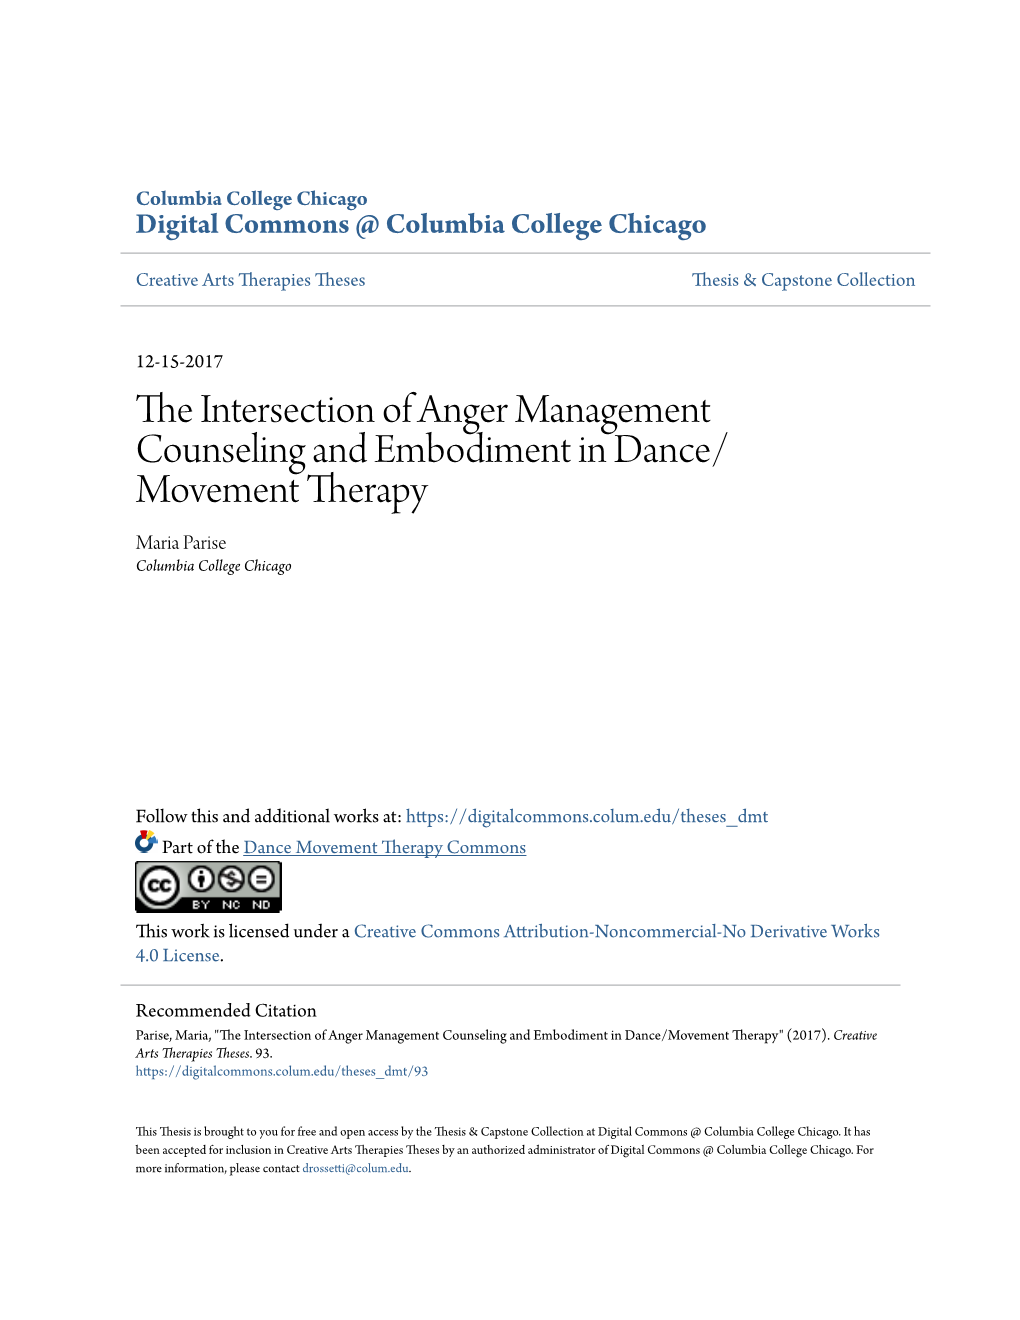 The Intersection of Anger Management Counseling and Embodiment in Dance/Movement Therapy